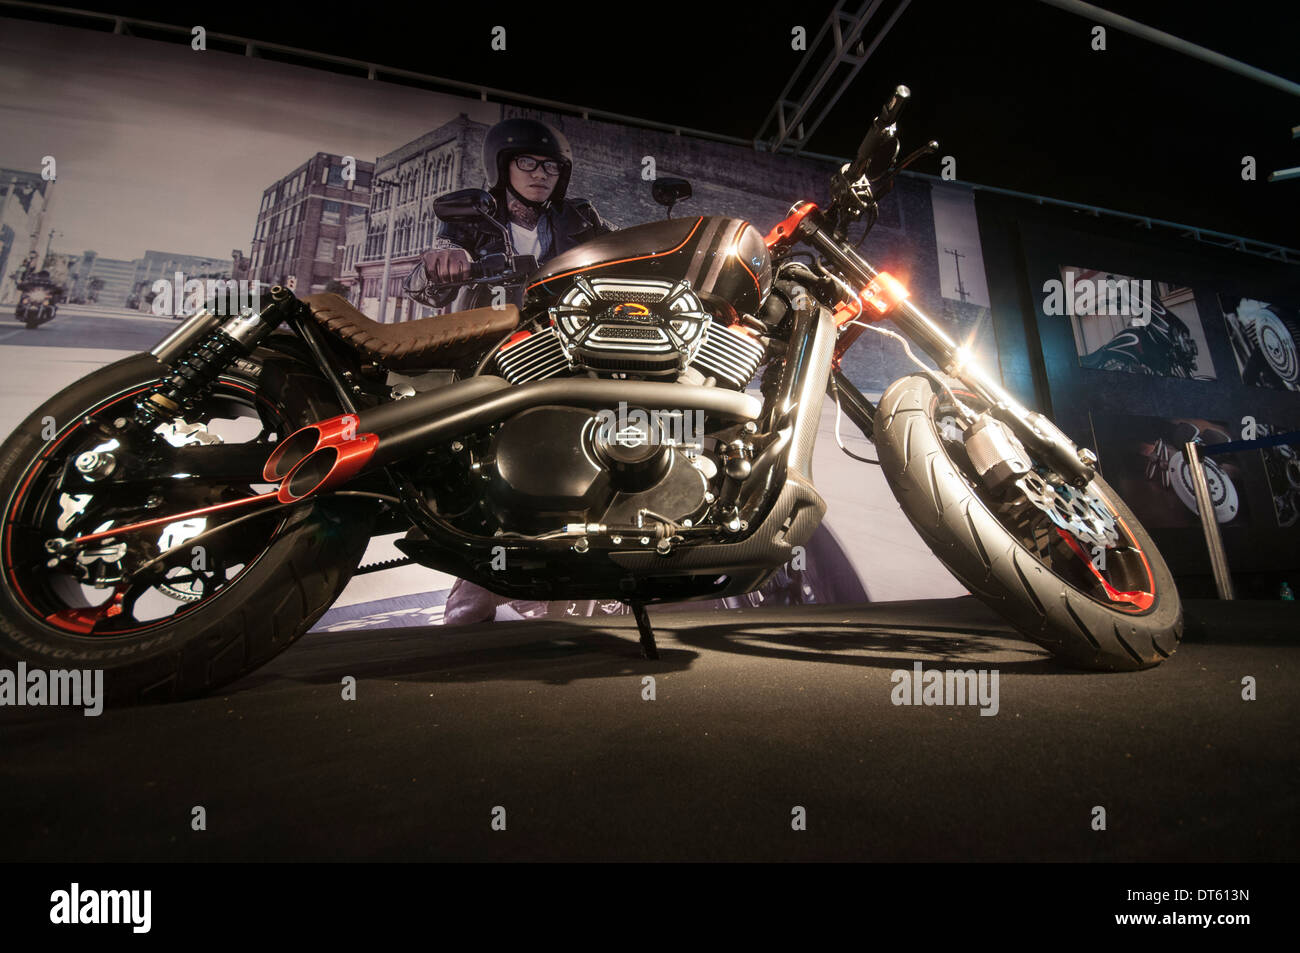 Harley Davidson 750 cc street bike launched at the India Bike Week held at Vagator Beach Goa, which is a festival of superbikes. Stock Photo